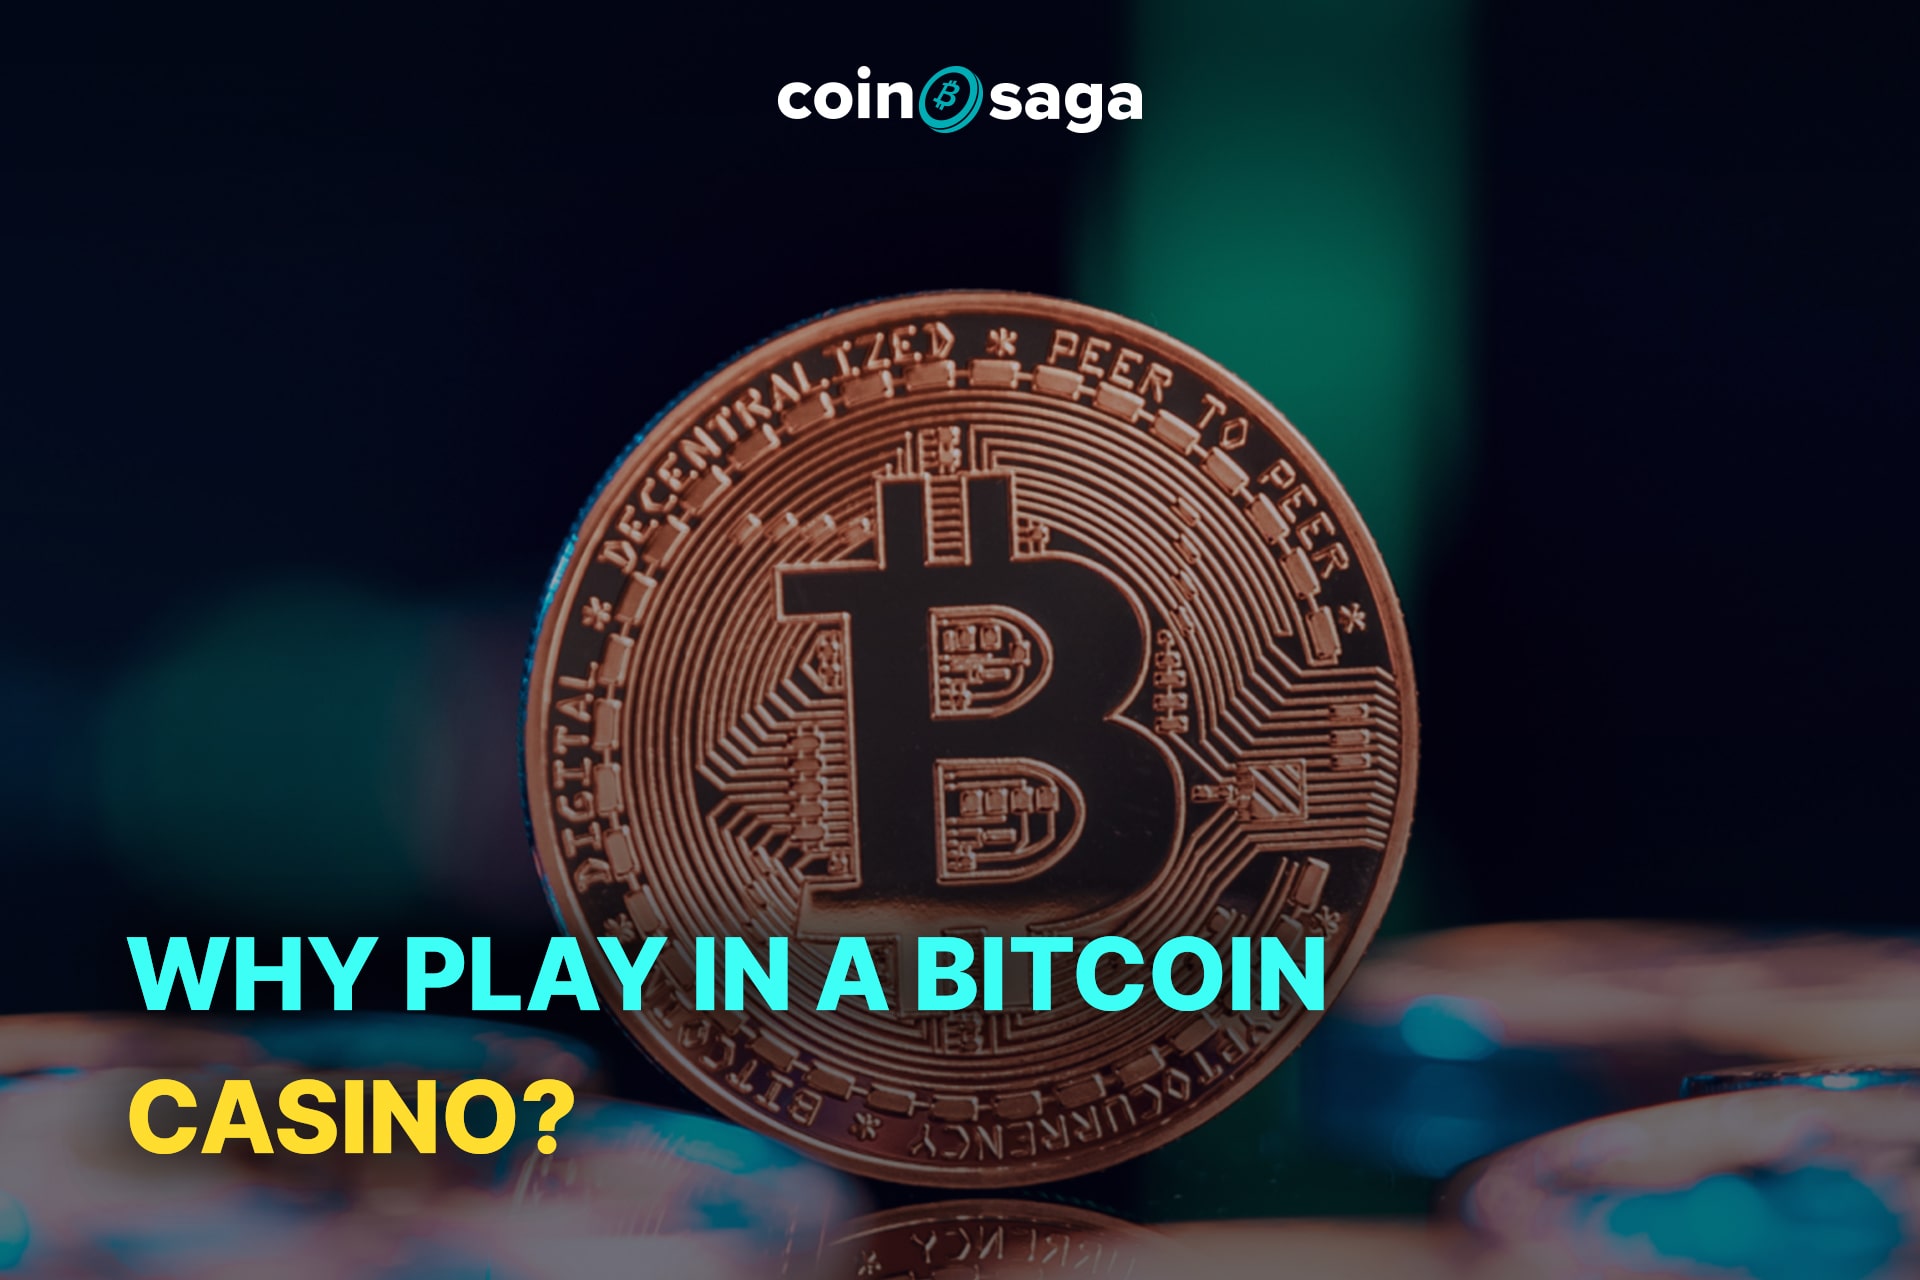 3 Easy Ways To Make bitcoin slots real money Faster